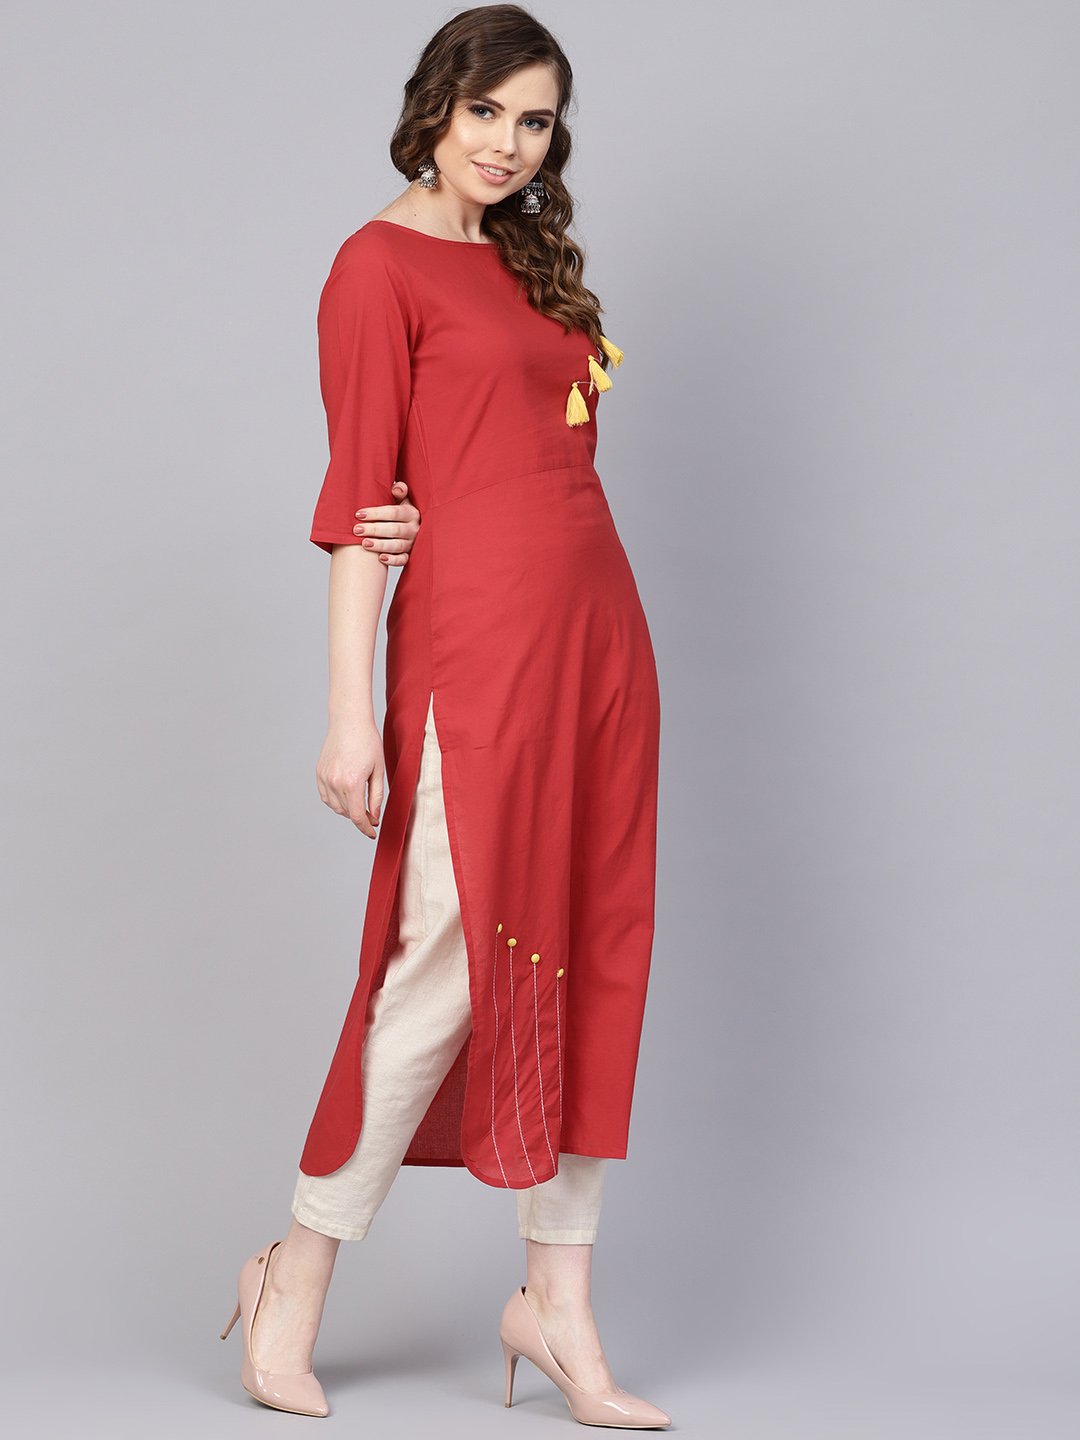 Women's Solid Red Kurta With Thread Stitch And Tassels Detailing With A Round Neck And 3/4Th Sleeves - Nayo Clothing